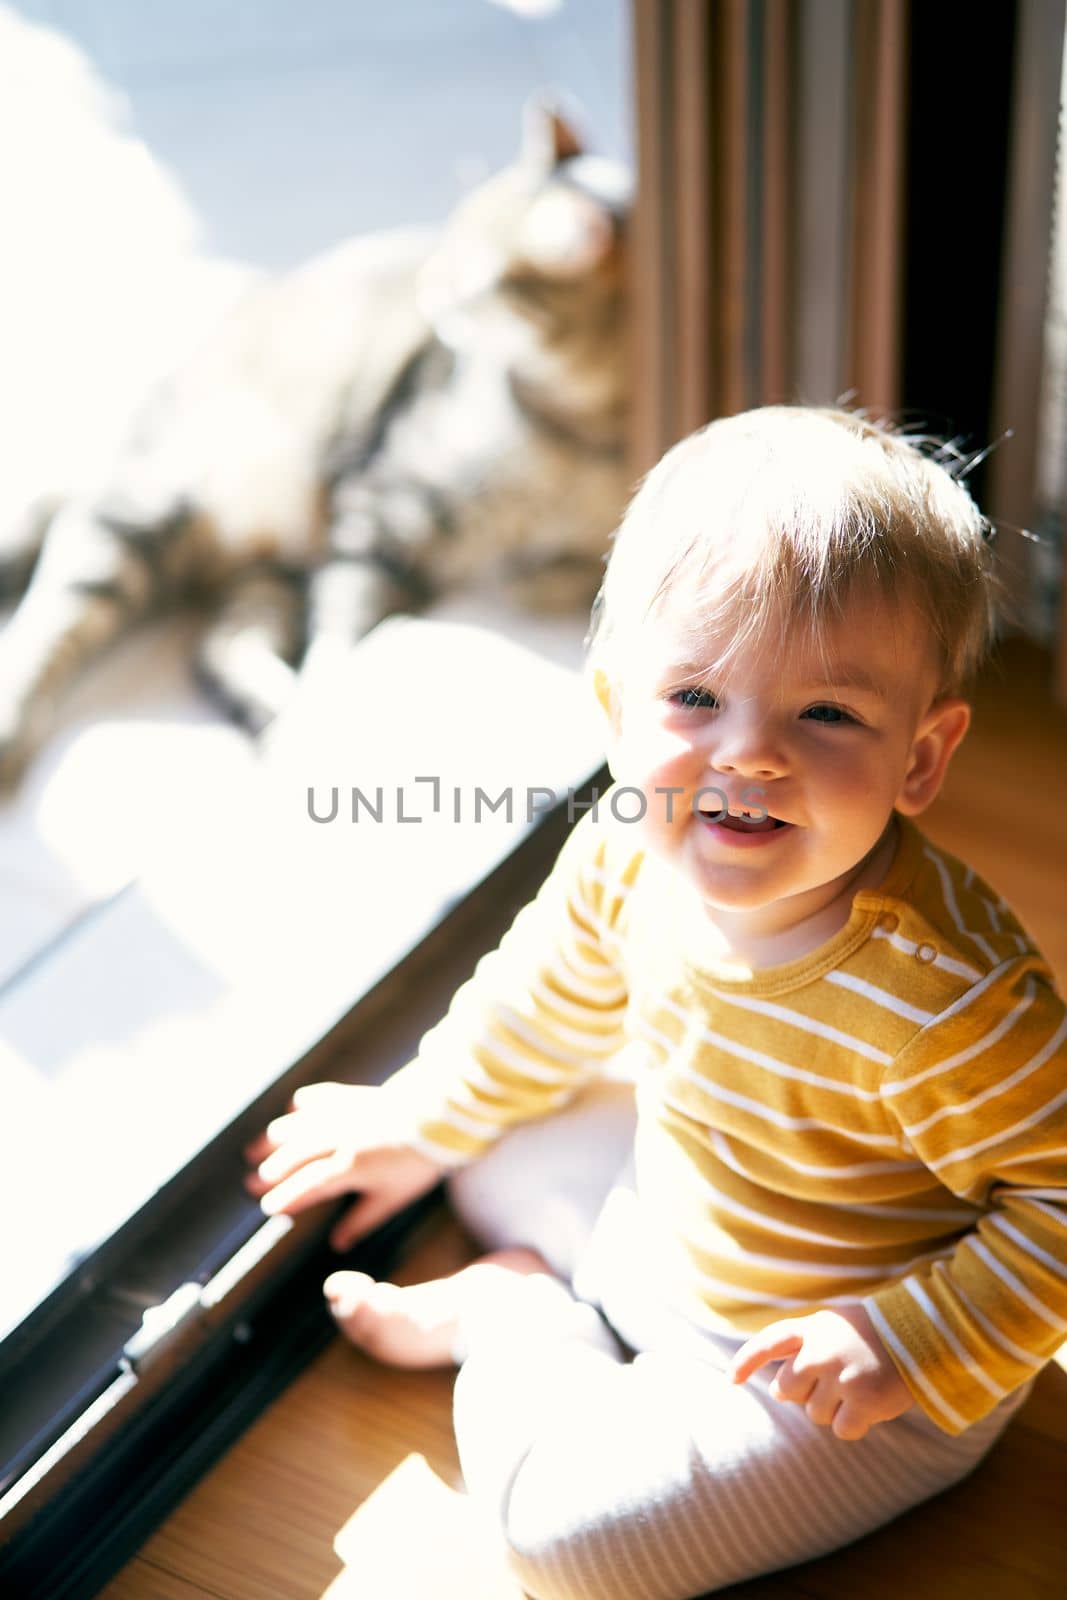 Laughing toddler sits on the floor near the open door to the courtyard. Close-up by Nadtochiy